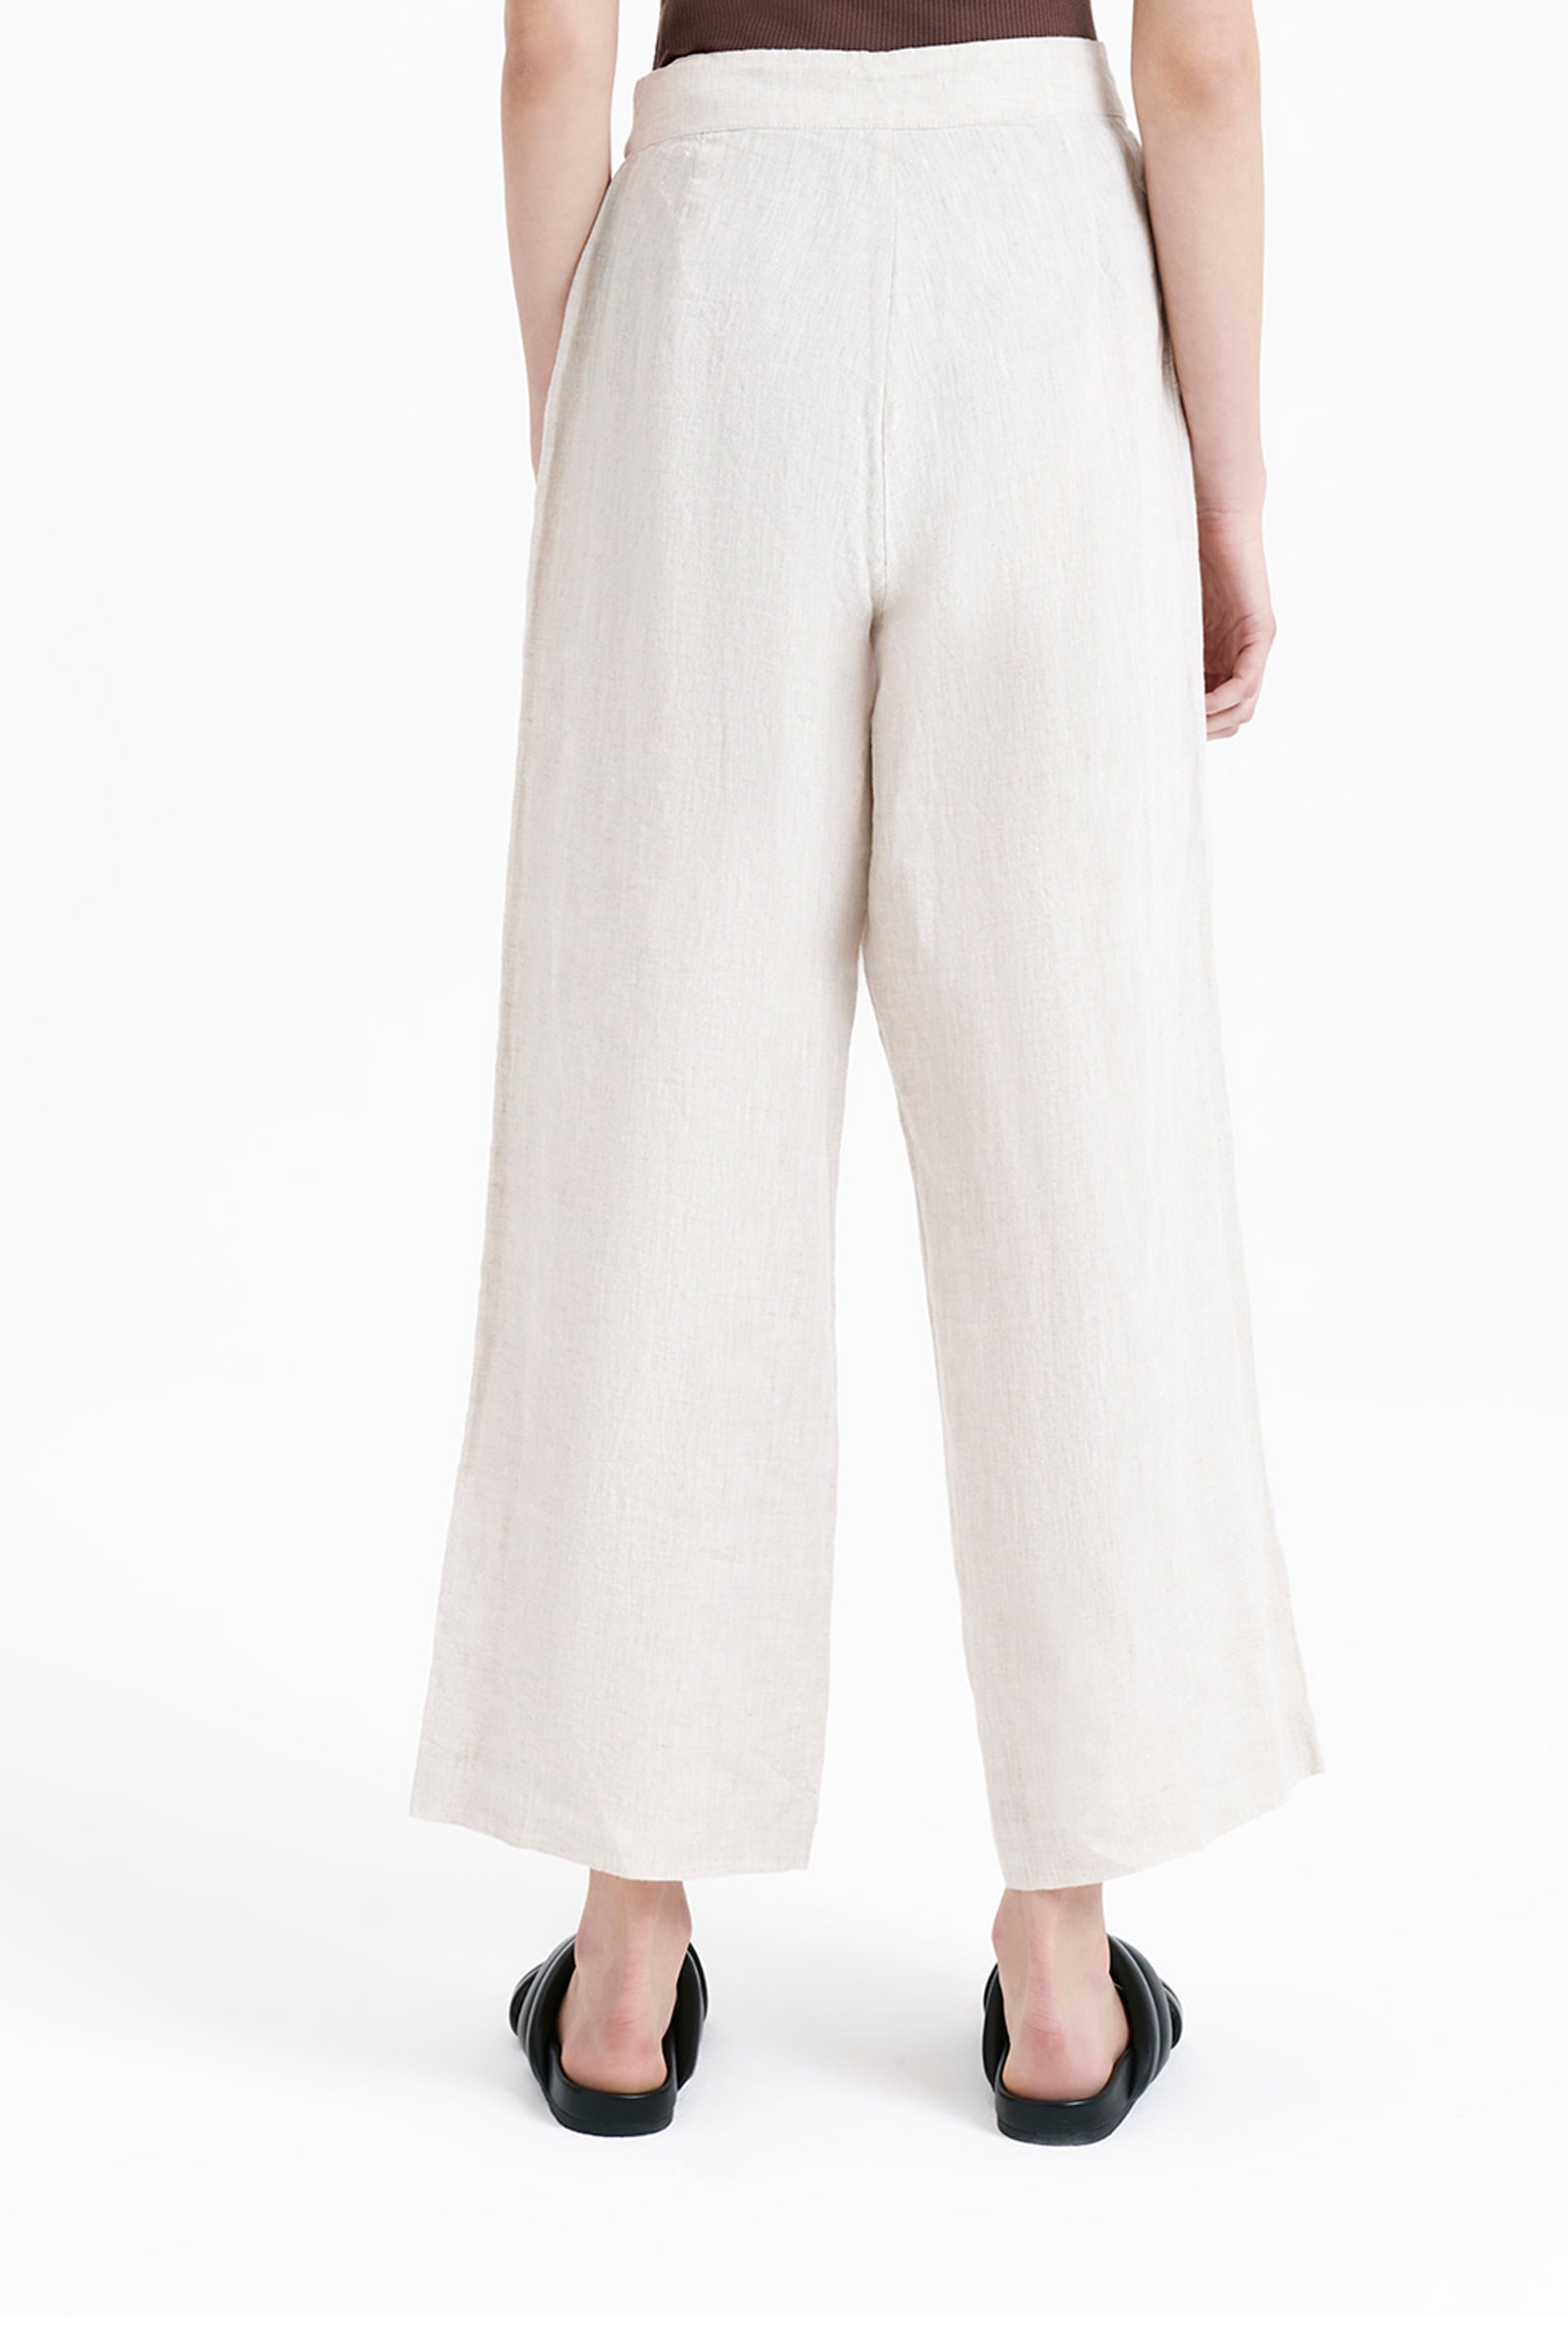 Nude Lucy Rynn Linen Pant in Natural